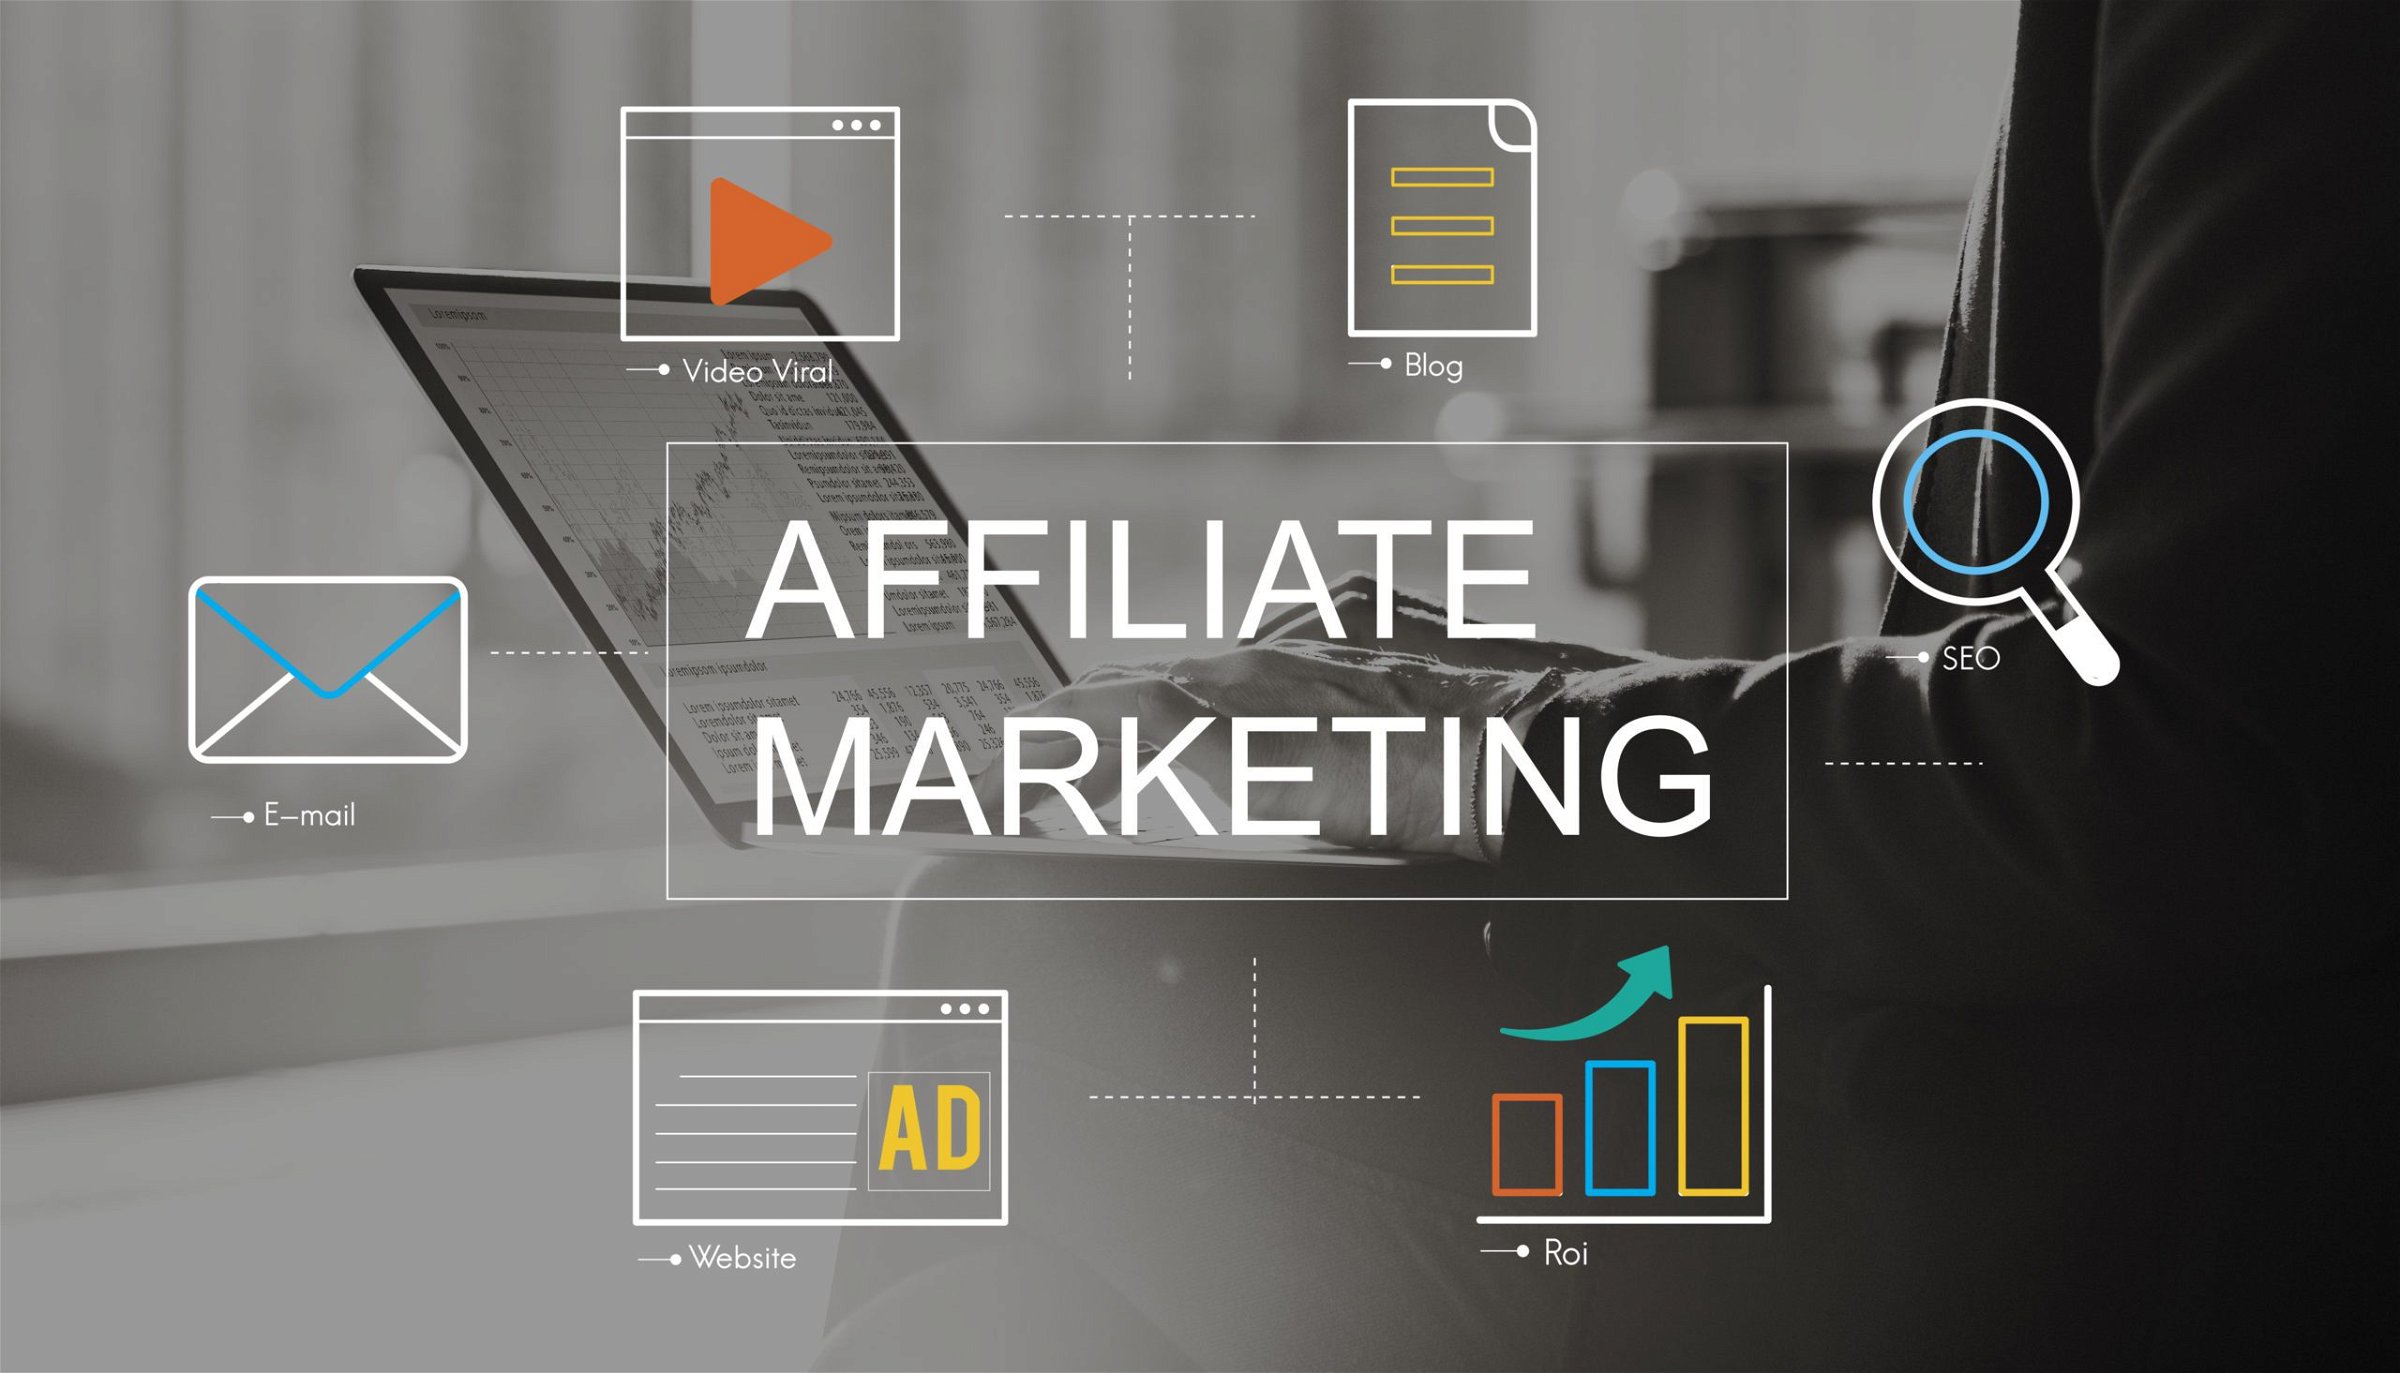 What is Affiliate Marketing? How To Use Facebook For Affiliate Marketing?